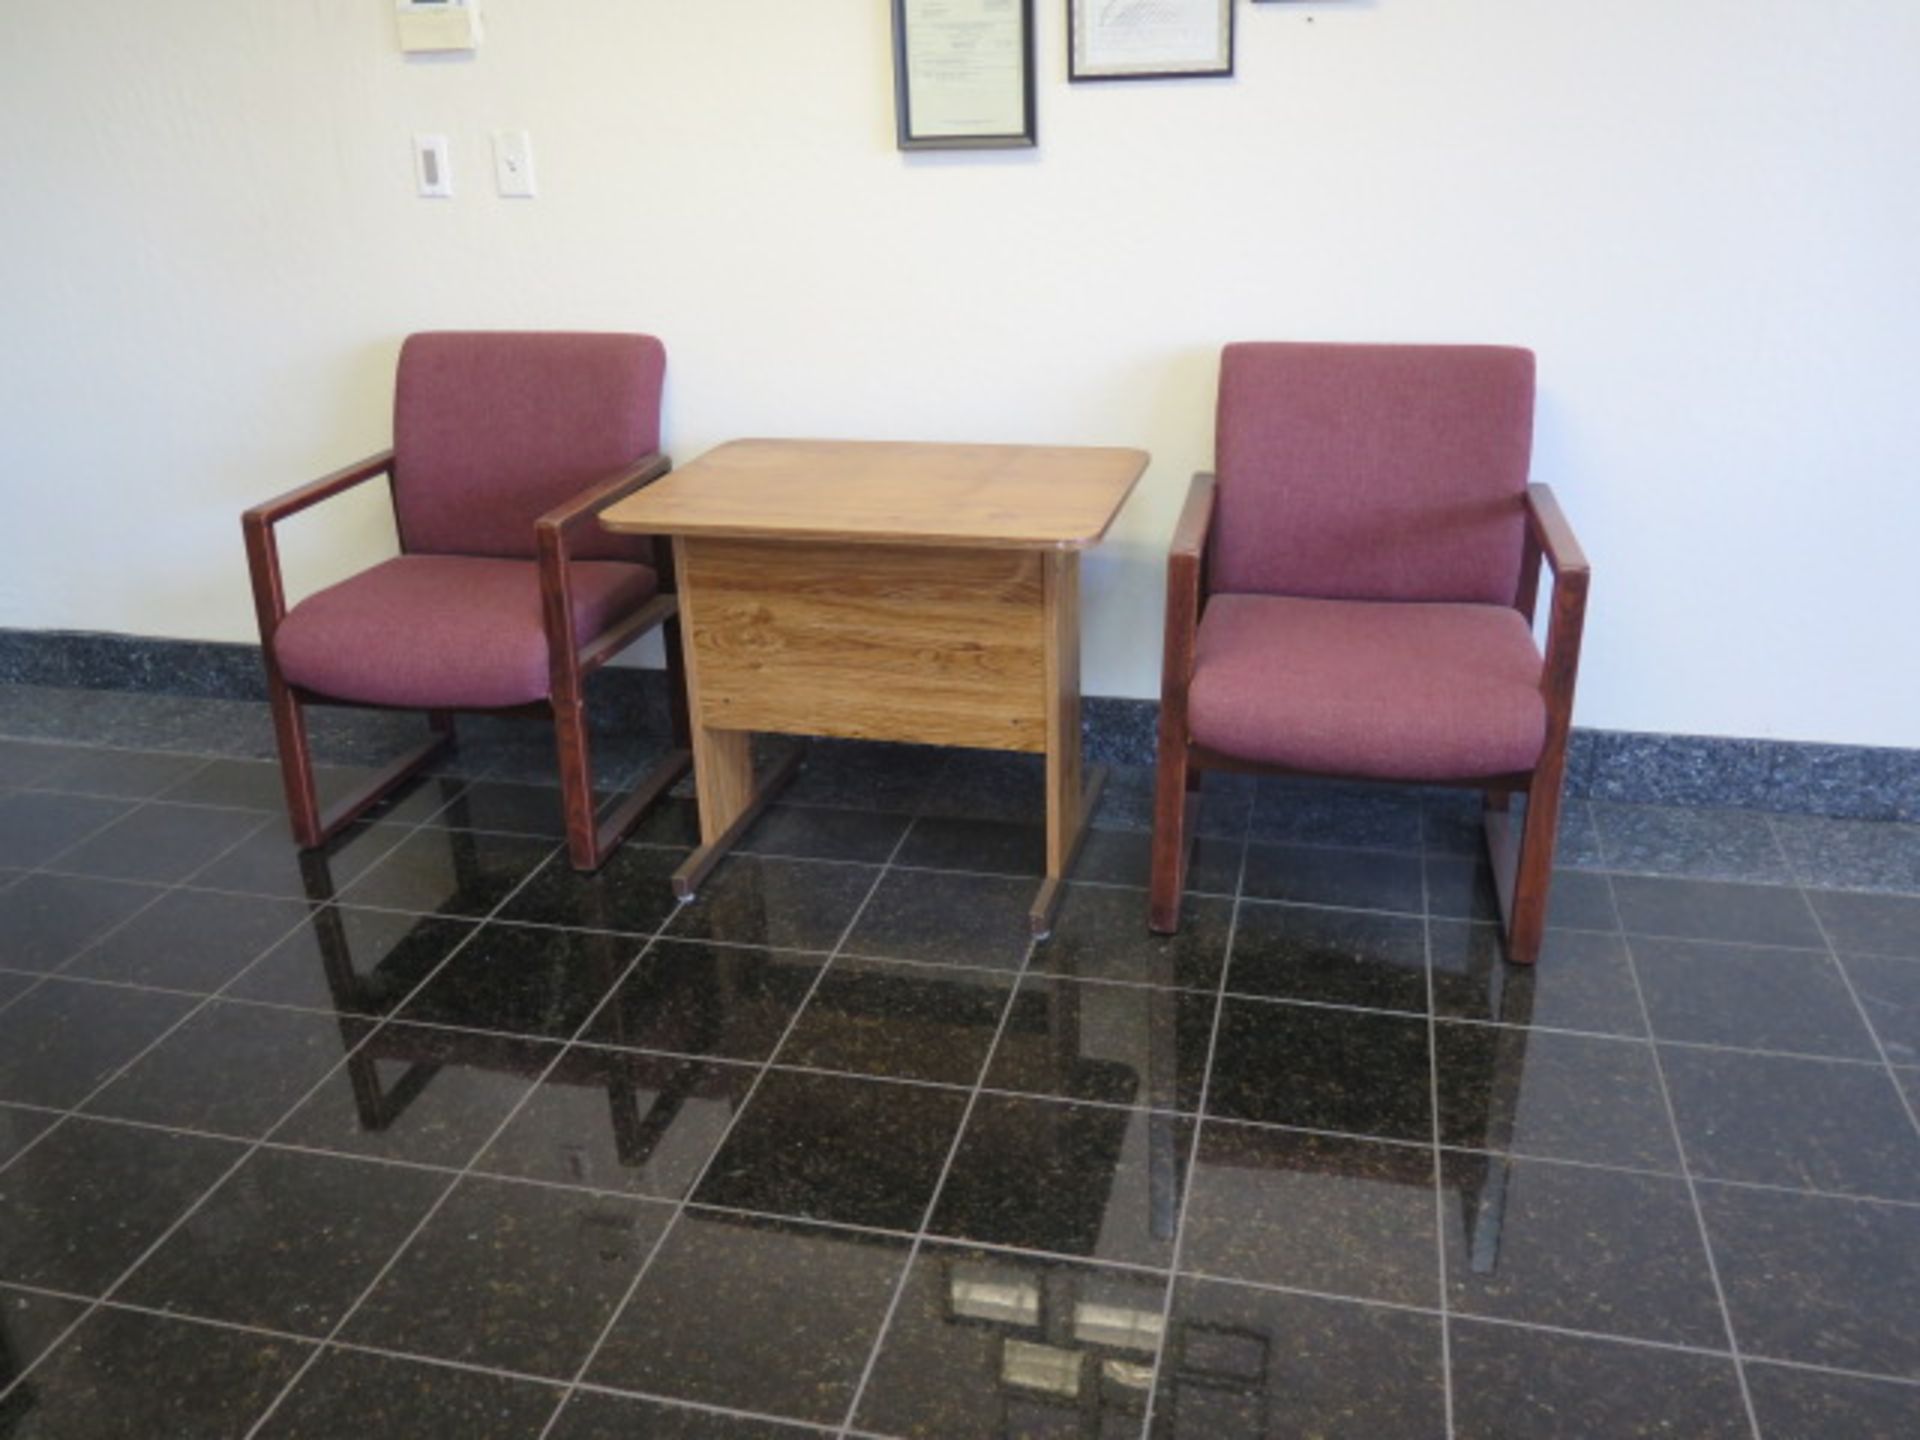 Reception Furniture, Desk Tables, Chairs and Plants - Image 2 of 3